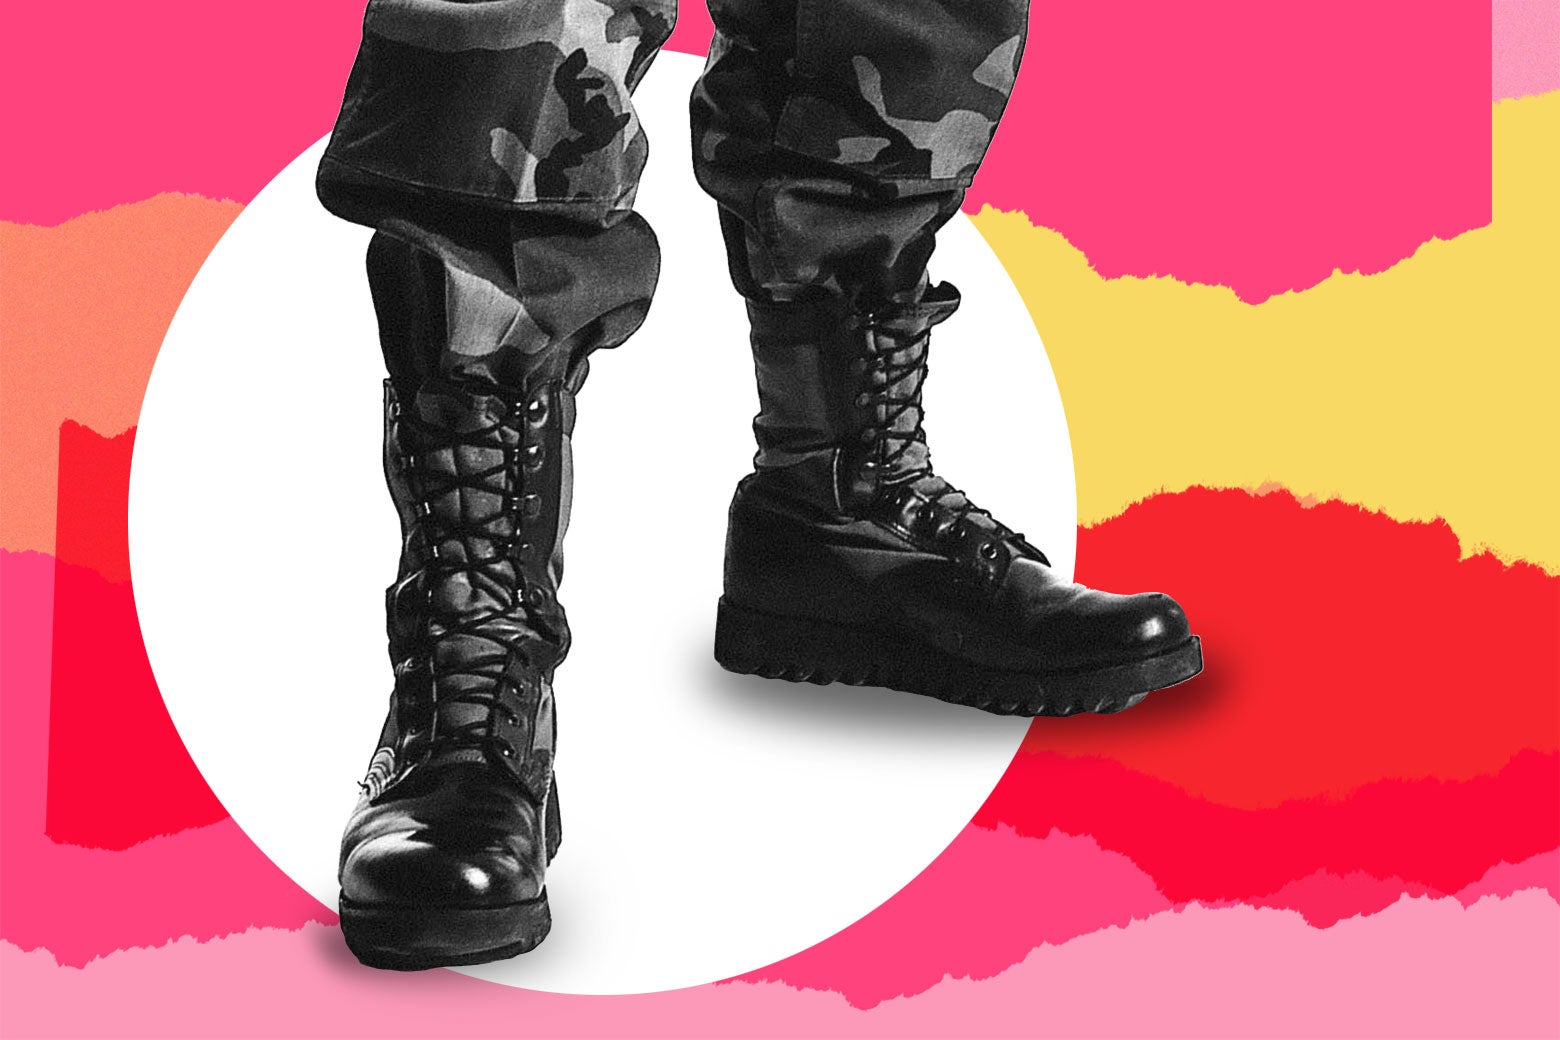 Care and Feeding background with combat boots and camo pants.